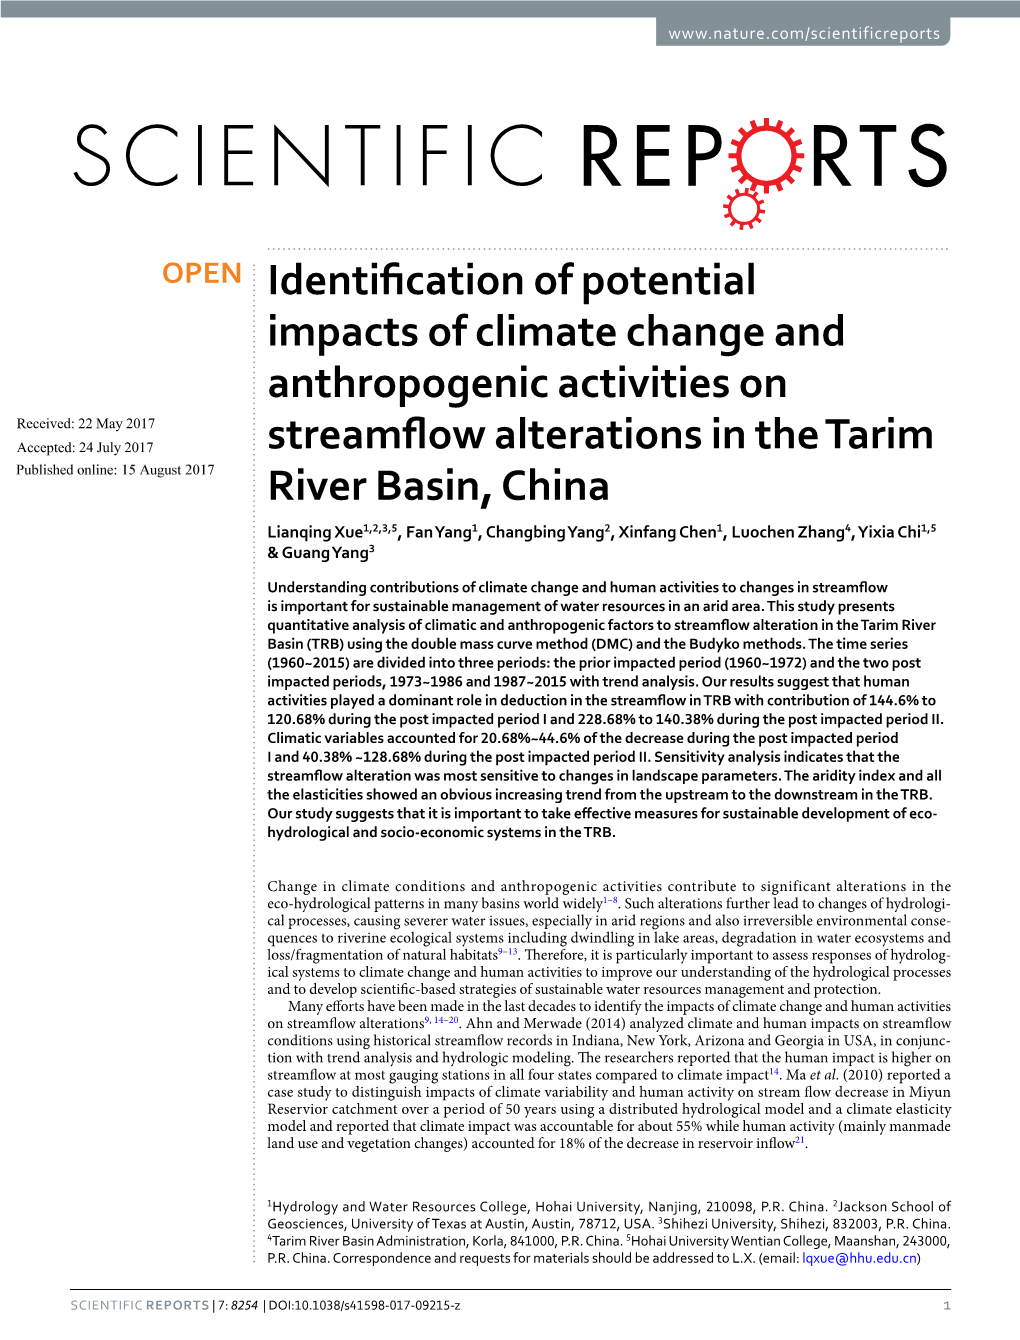 Identification of Potential Impacts of Climate Change and Anthropogenic